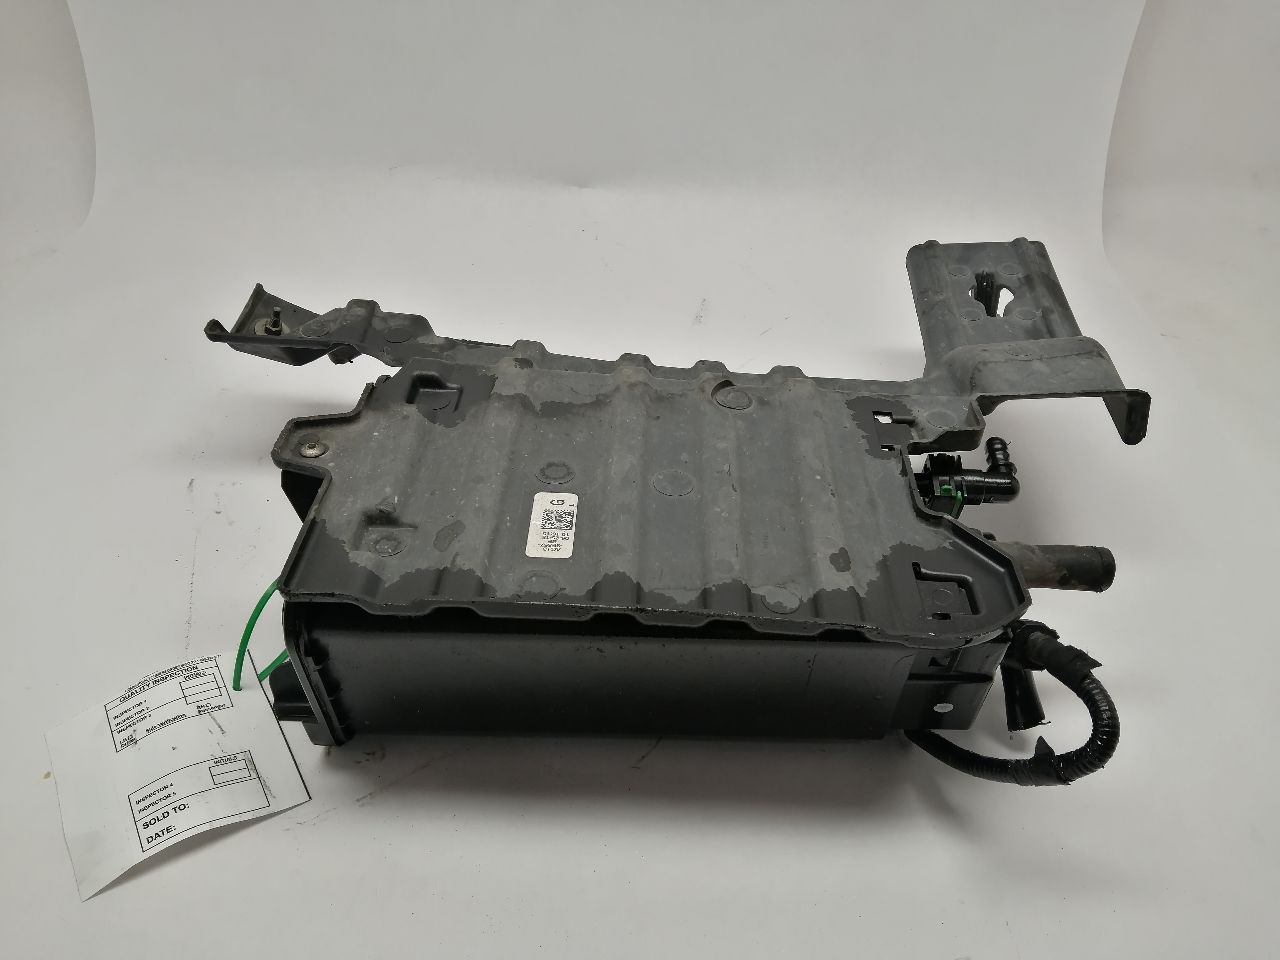 2018 ford explorer fuel pump replacement